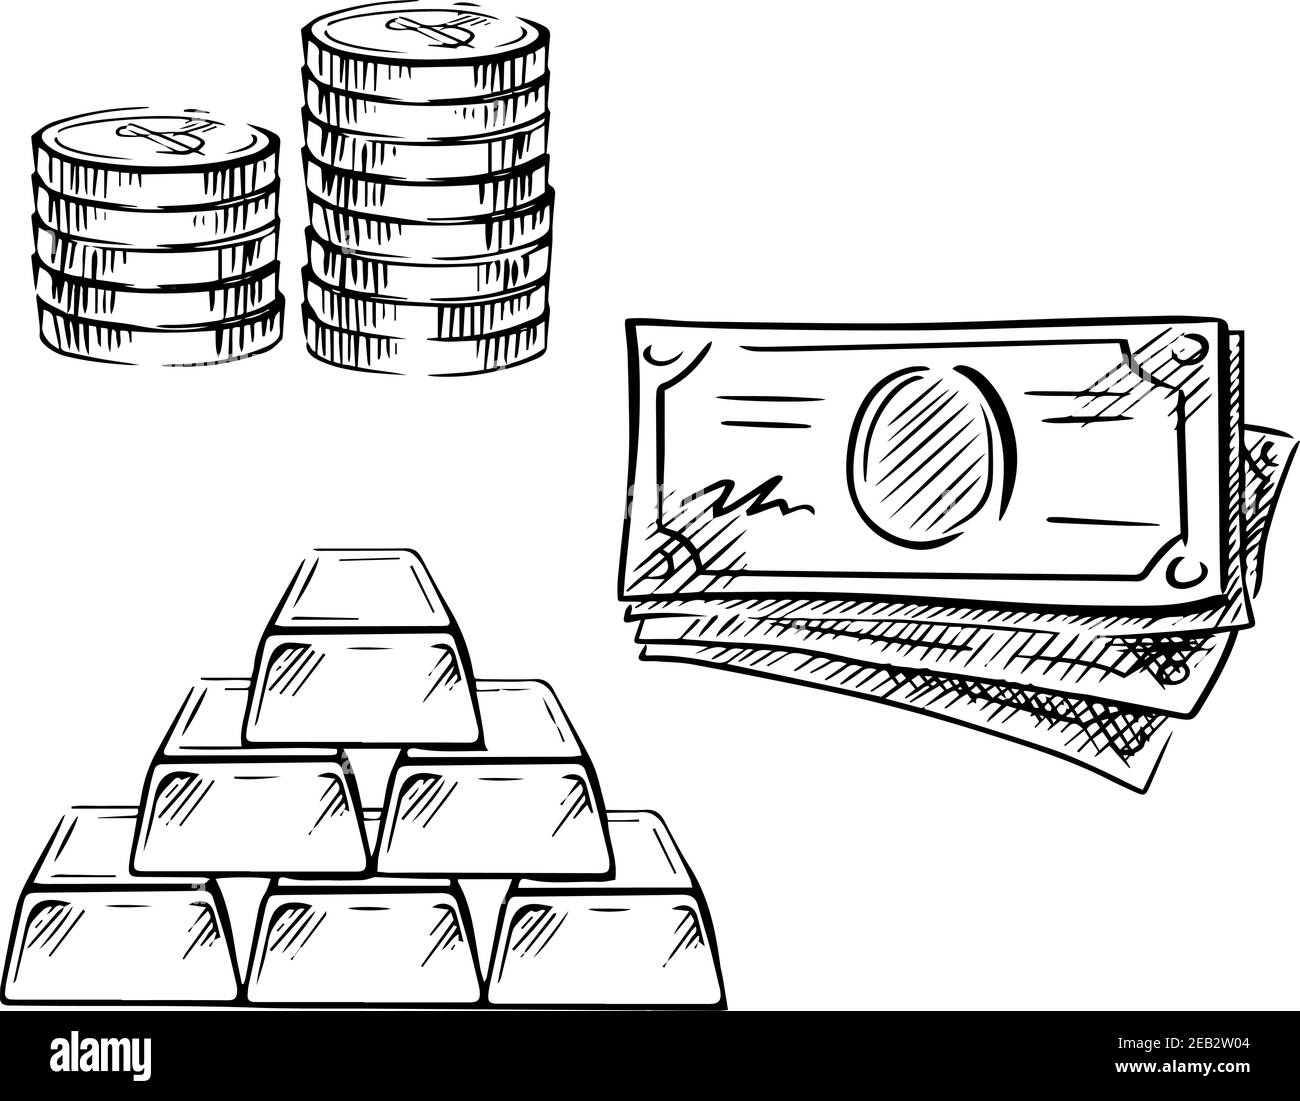 gold bar clipart black and white